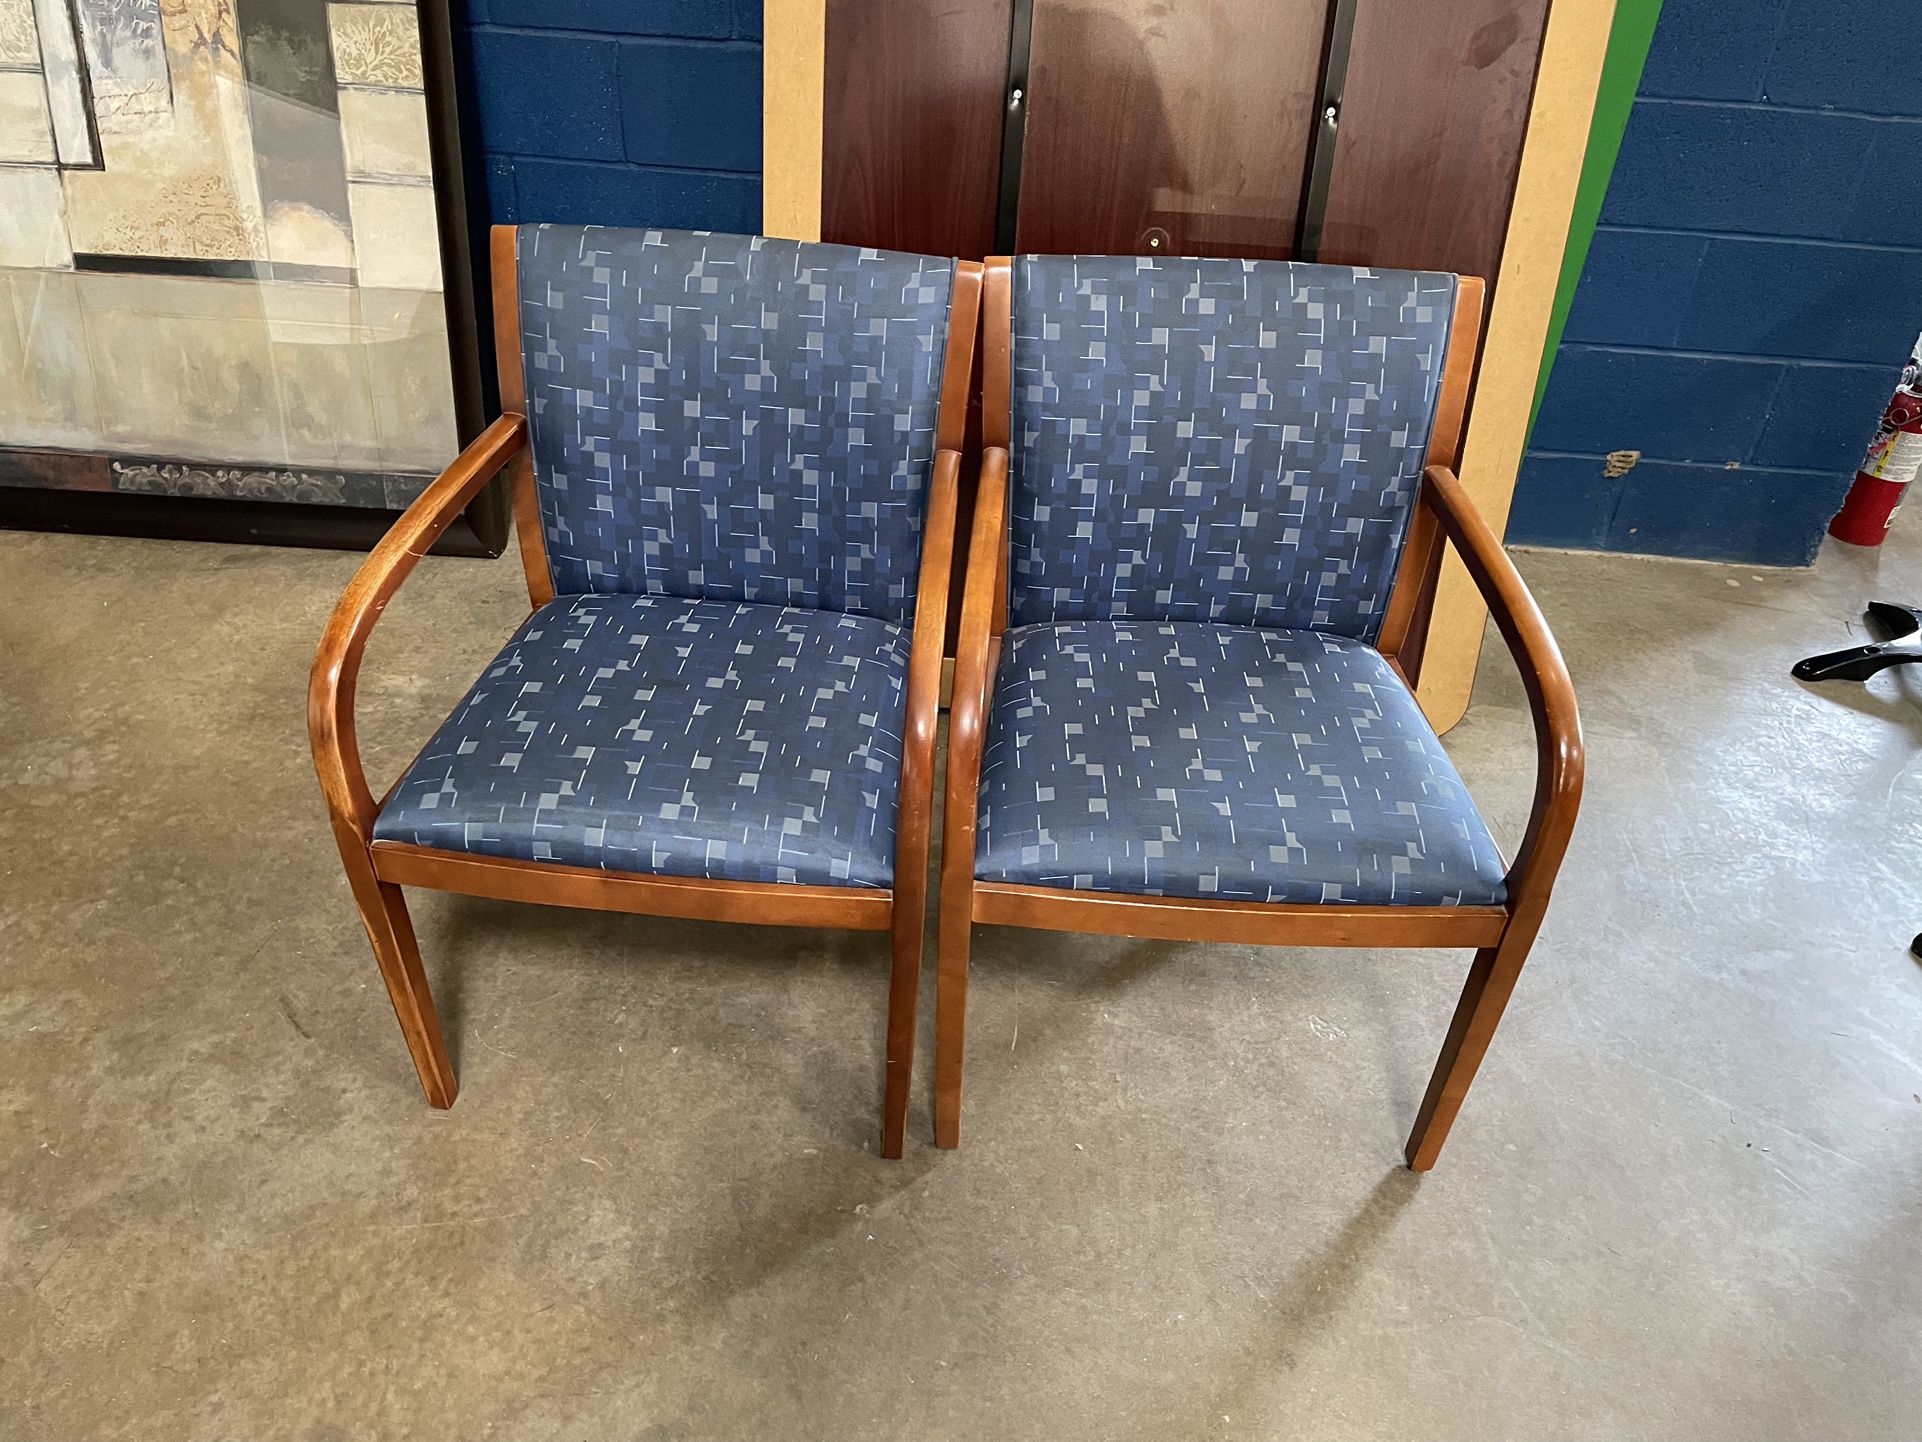 2 Blue & Cherry Office Guest Chairs! Only $30 Ea!